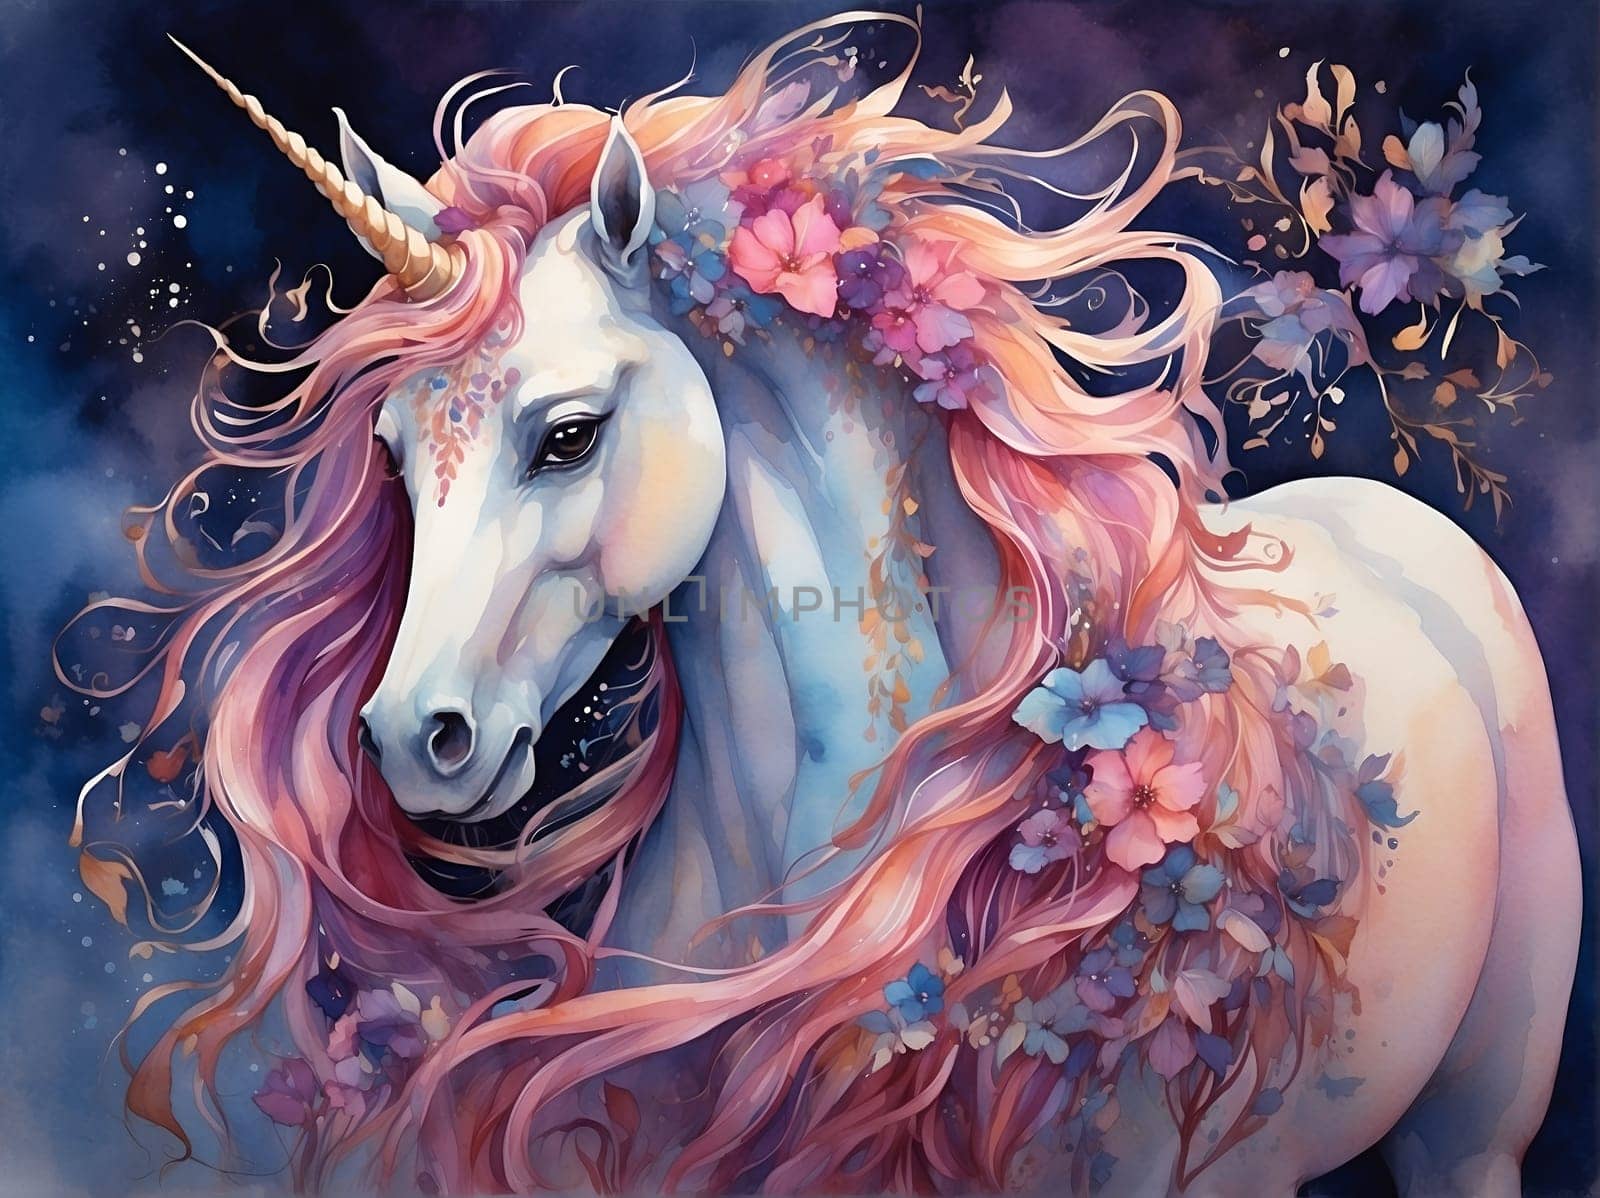 A vibrant painting capturing the magical essence of a unicorn with a mane of pink hair.